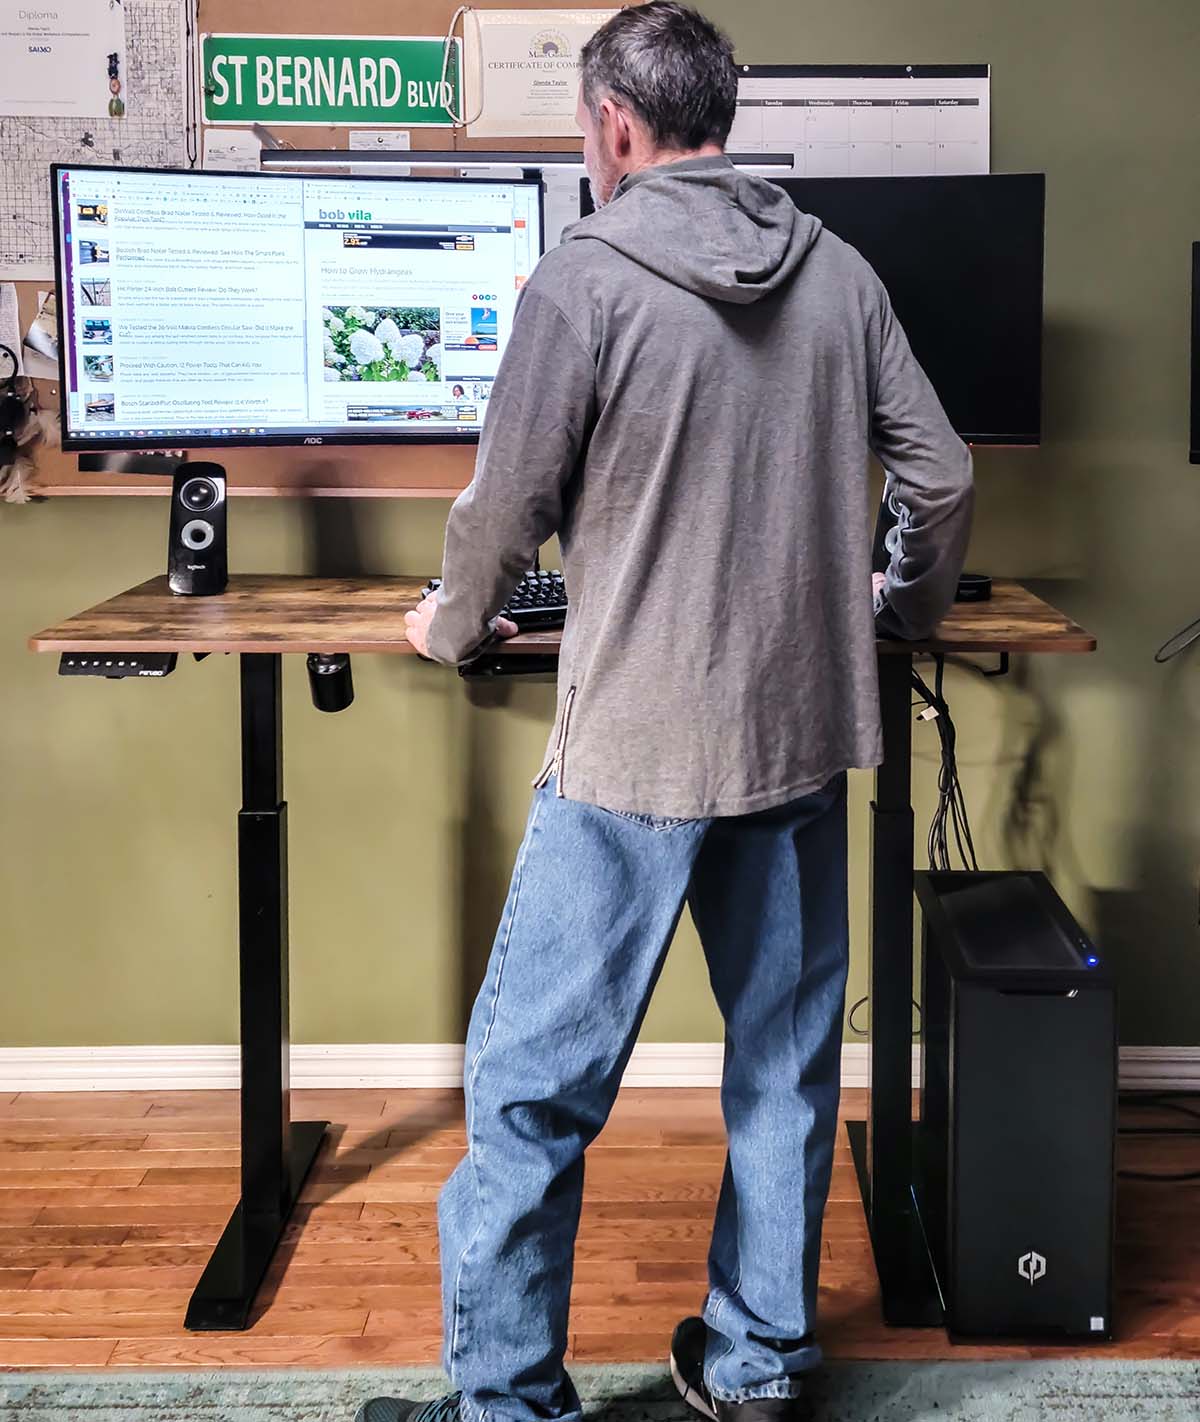 A man stands and works on a computer at the Fezibo standing desk